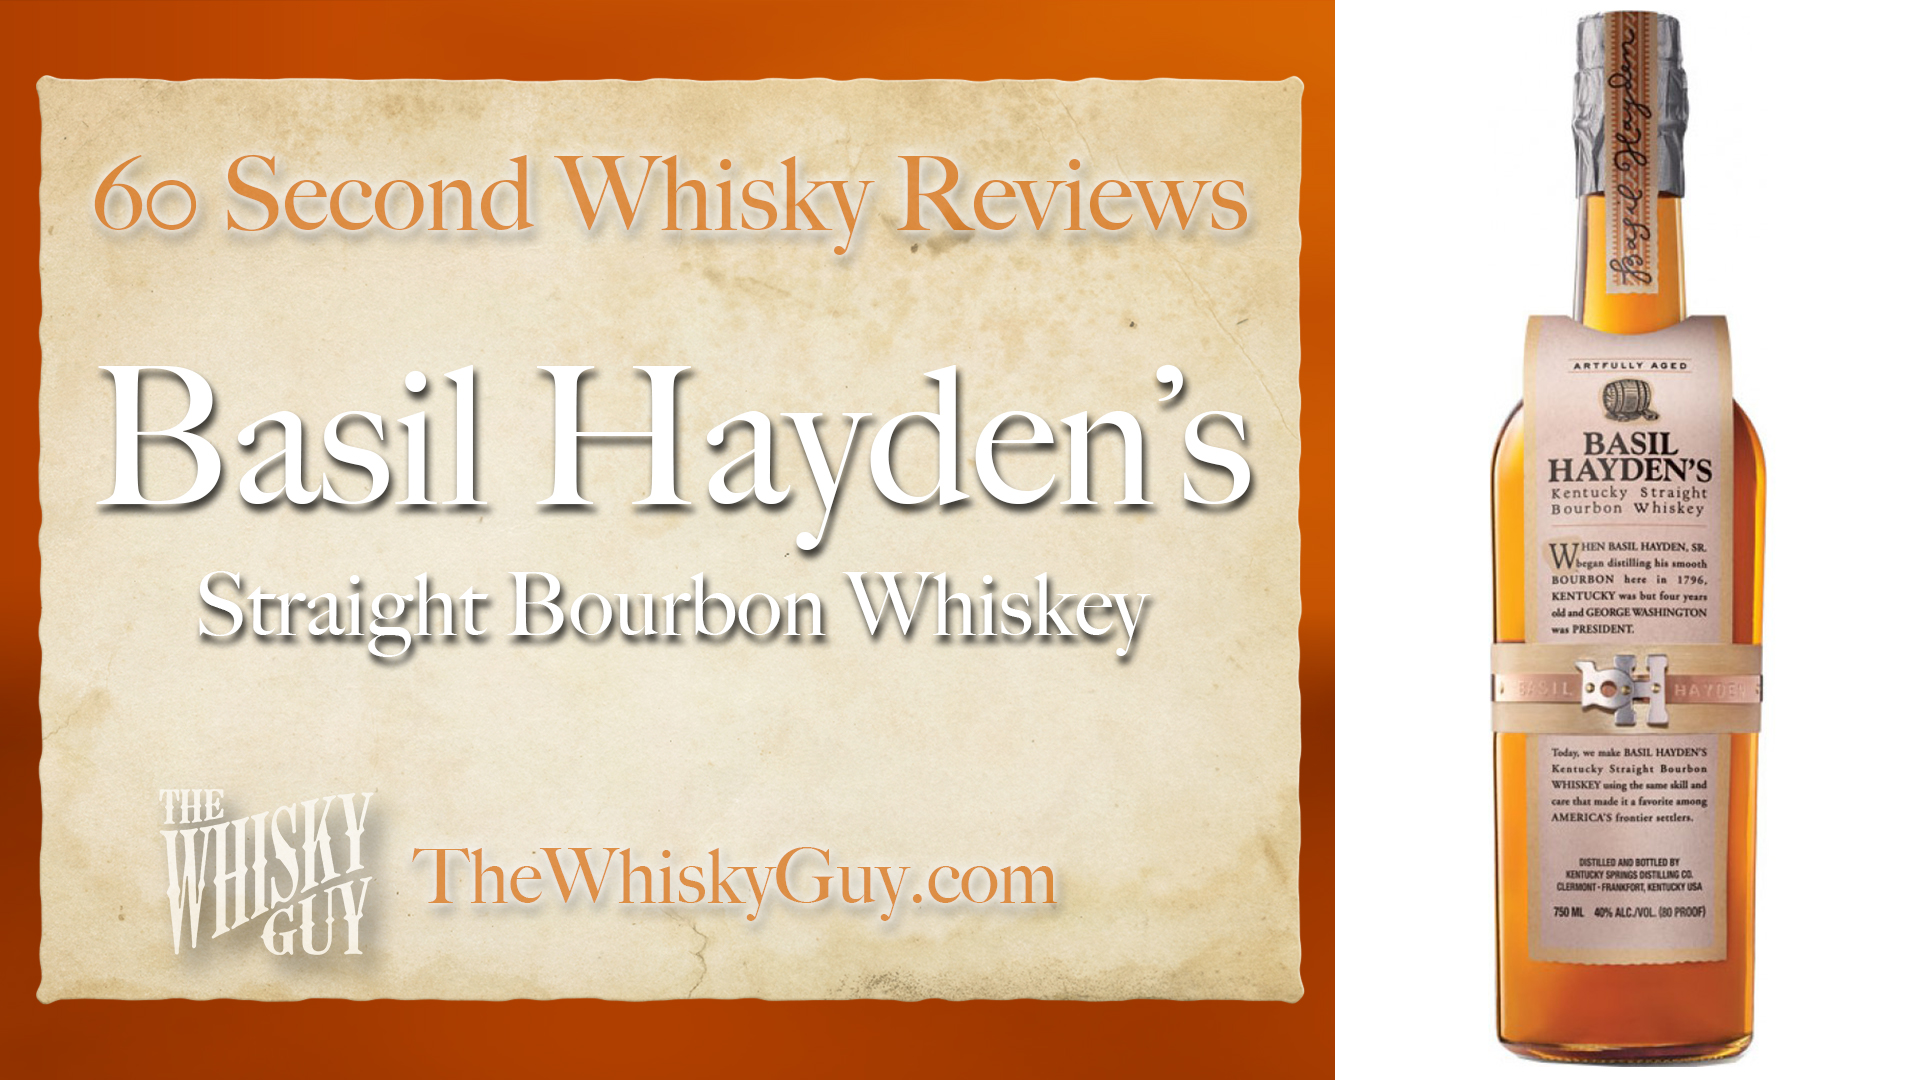 Does Basil Hayden’s Straight Bourbon Whiskey belong in your liquor cabinet? Is it worth the price at the bar? Give The Whisky Guy 60 seconds and find out! In just 60 seconds, The Whisky Guy reviews Irish Whiskey, Scotch Whisky, Single Malt, Canadian Whisky, Bourbon Whiskey, Japanese Whisky and other whiskies from around the world. Find more at TheWhiskyGuy.com. All original content © Ari Shapiro - TheWhiskyGuy.com